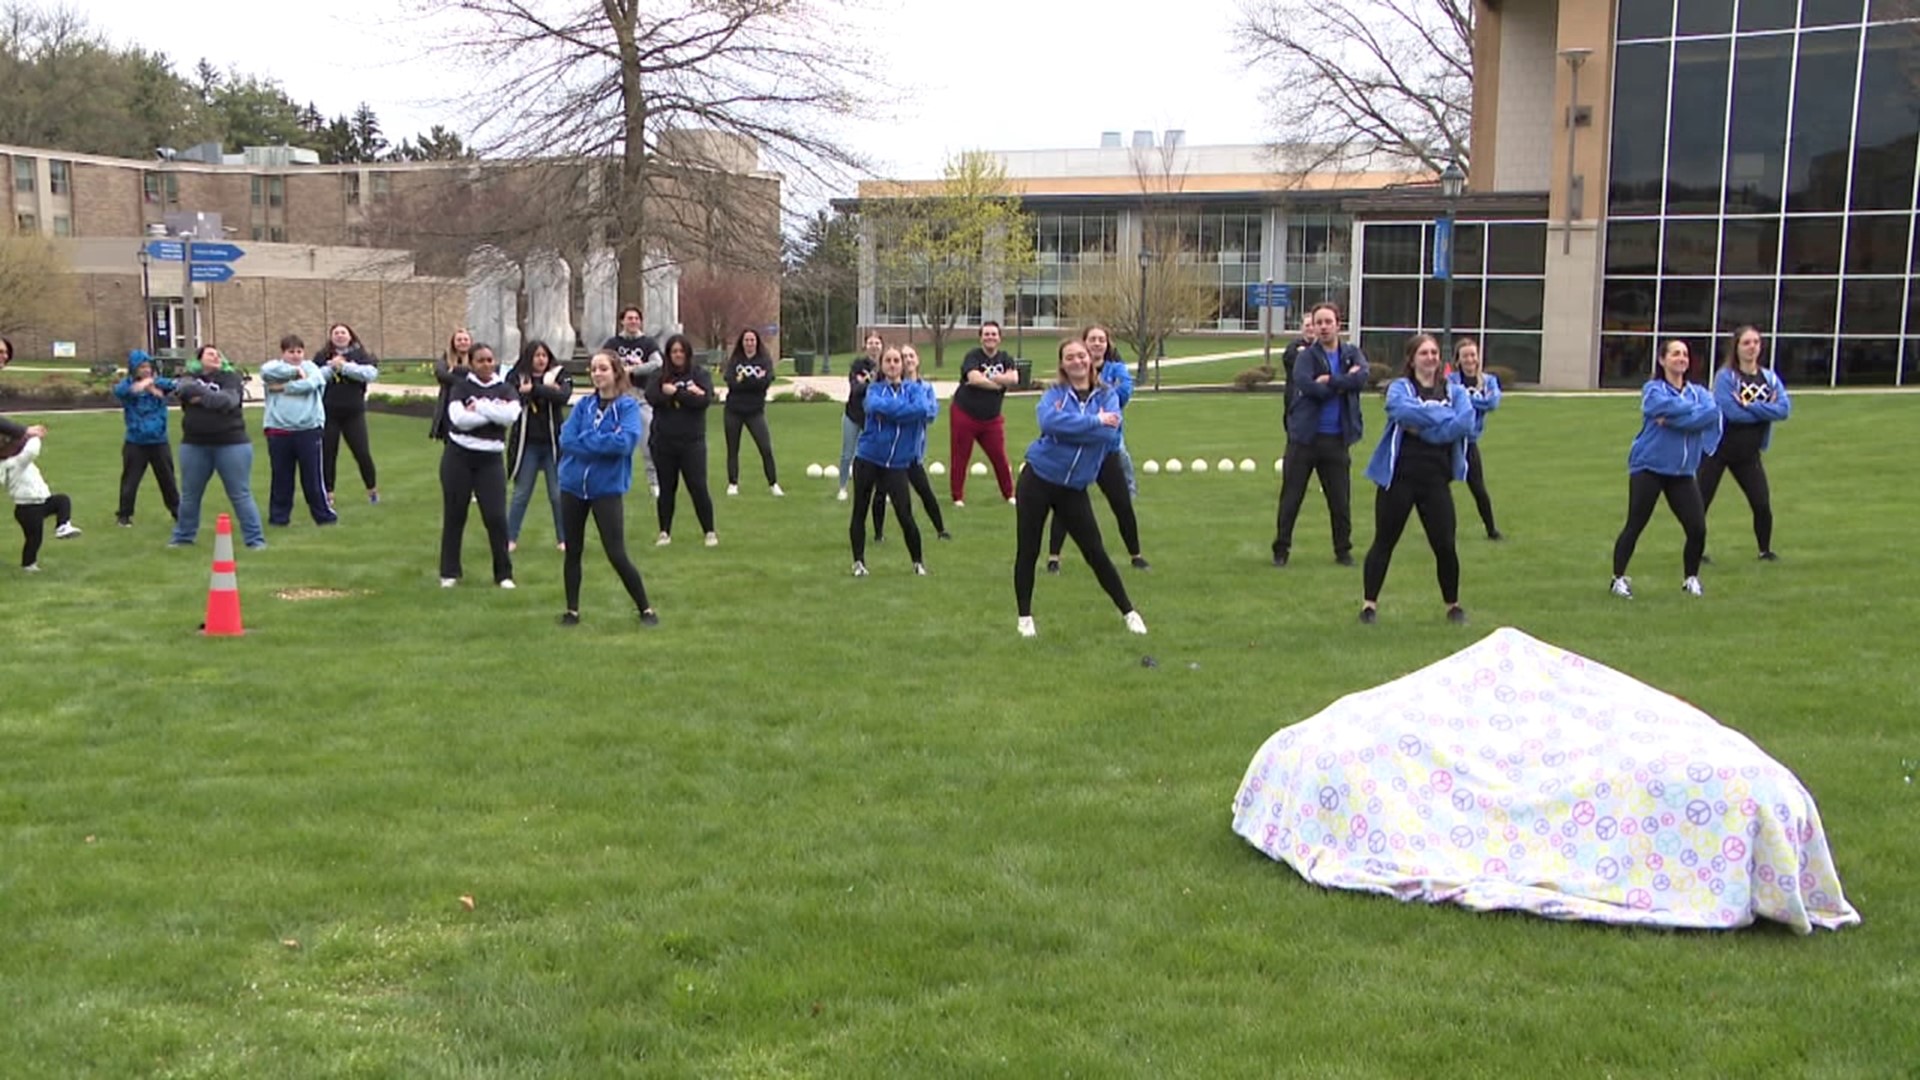 Misericordia University held a 'For the Kids' event Sunday to help benefit Madison Gross, a junior at the university battling ovarian cancer.